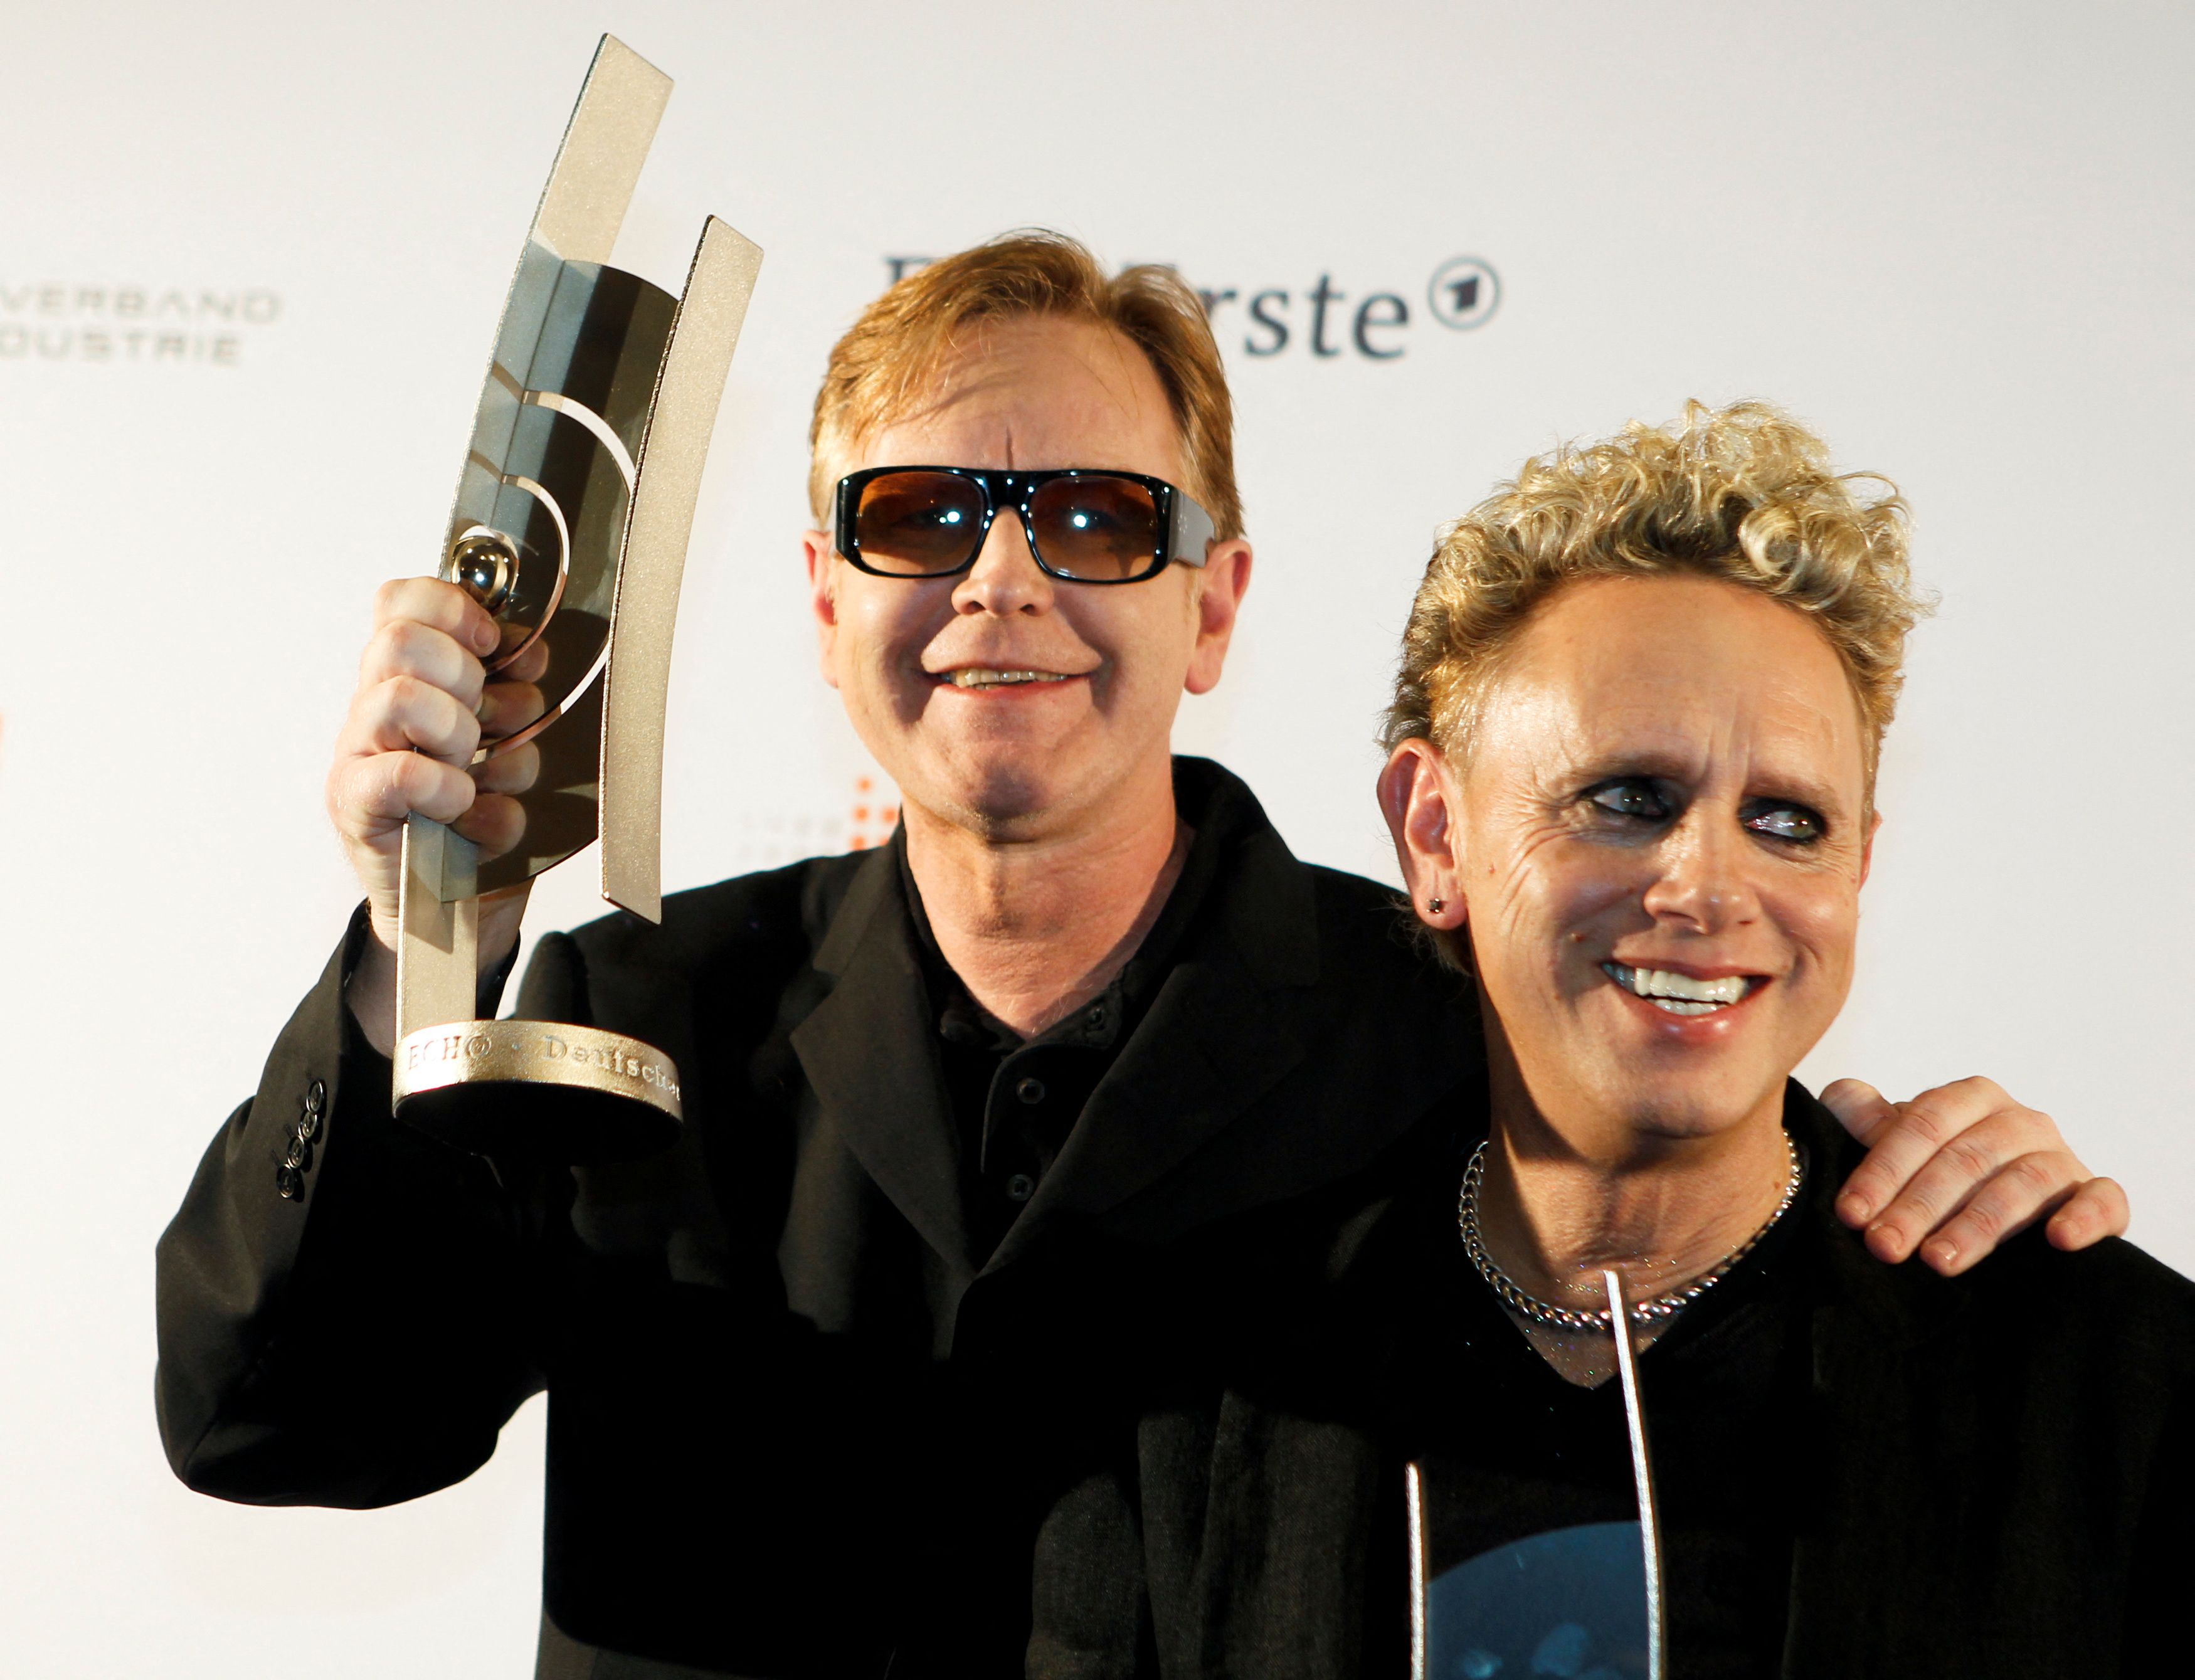 Gore and Fletcher of British band Depeche Mode pose with trophies at Echo Music Awards ceremony in Berlin